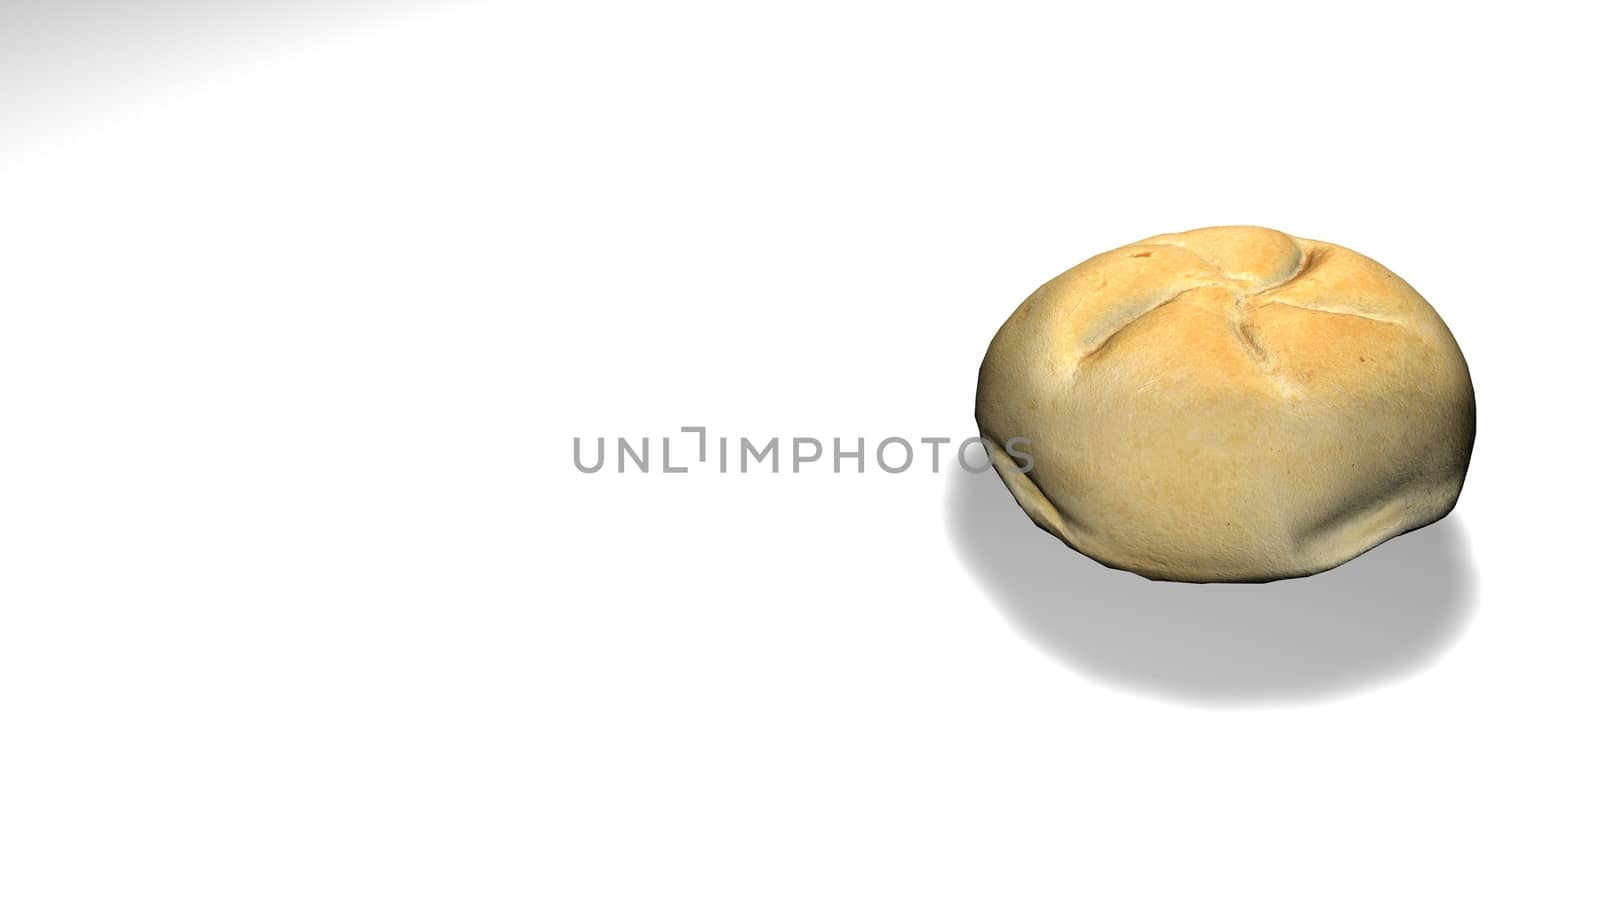 Homemade bread isolated on a white background. Closeup view of bread roll with shadow under light.